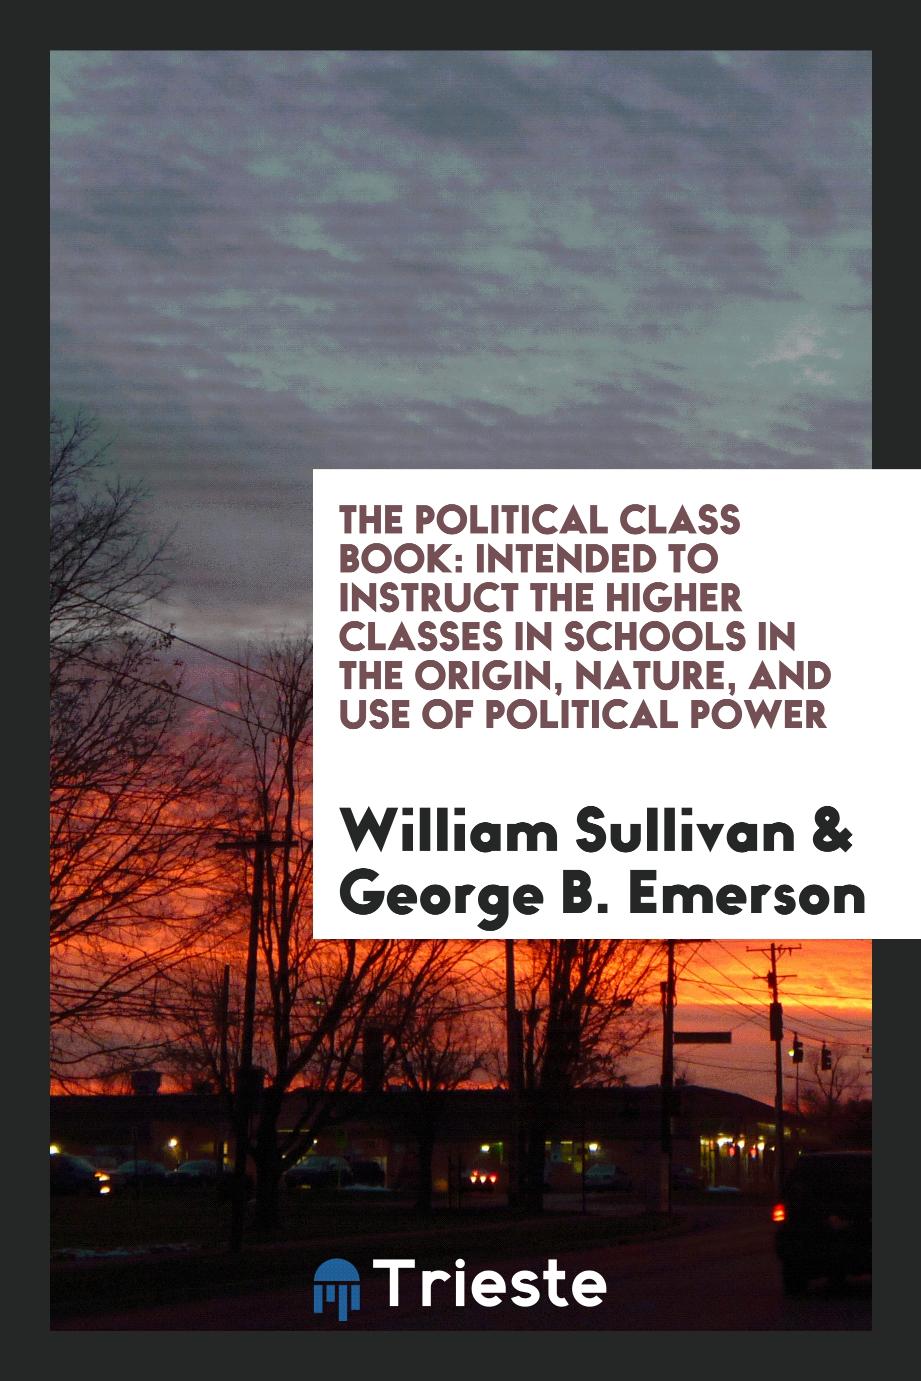 The political class book: intended to instruct the higher classes in schools in the origin, nature, and use of political power